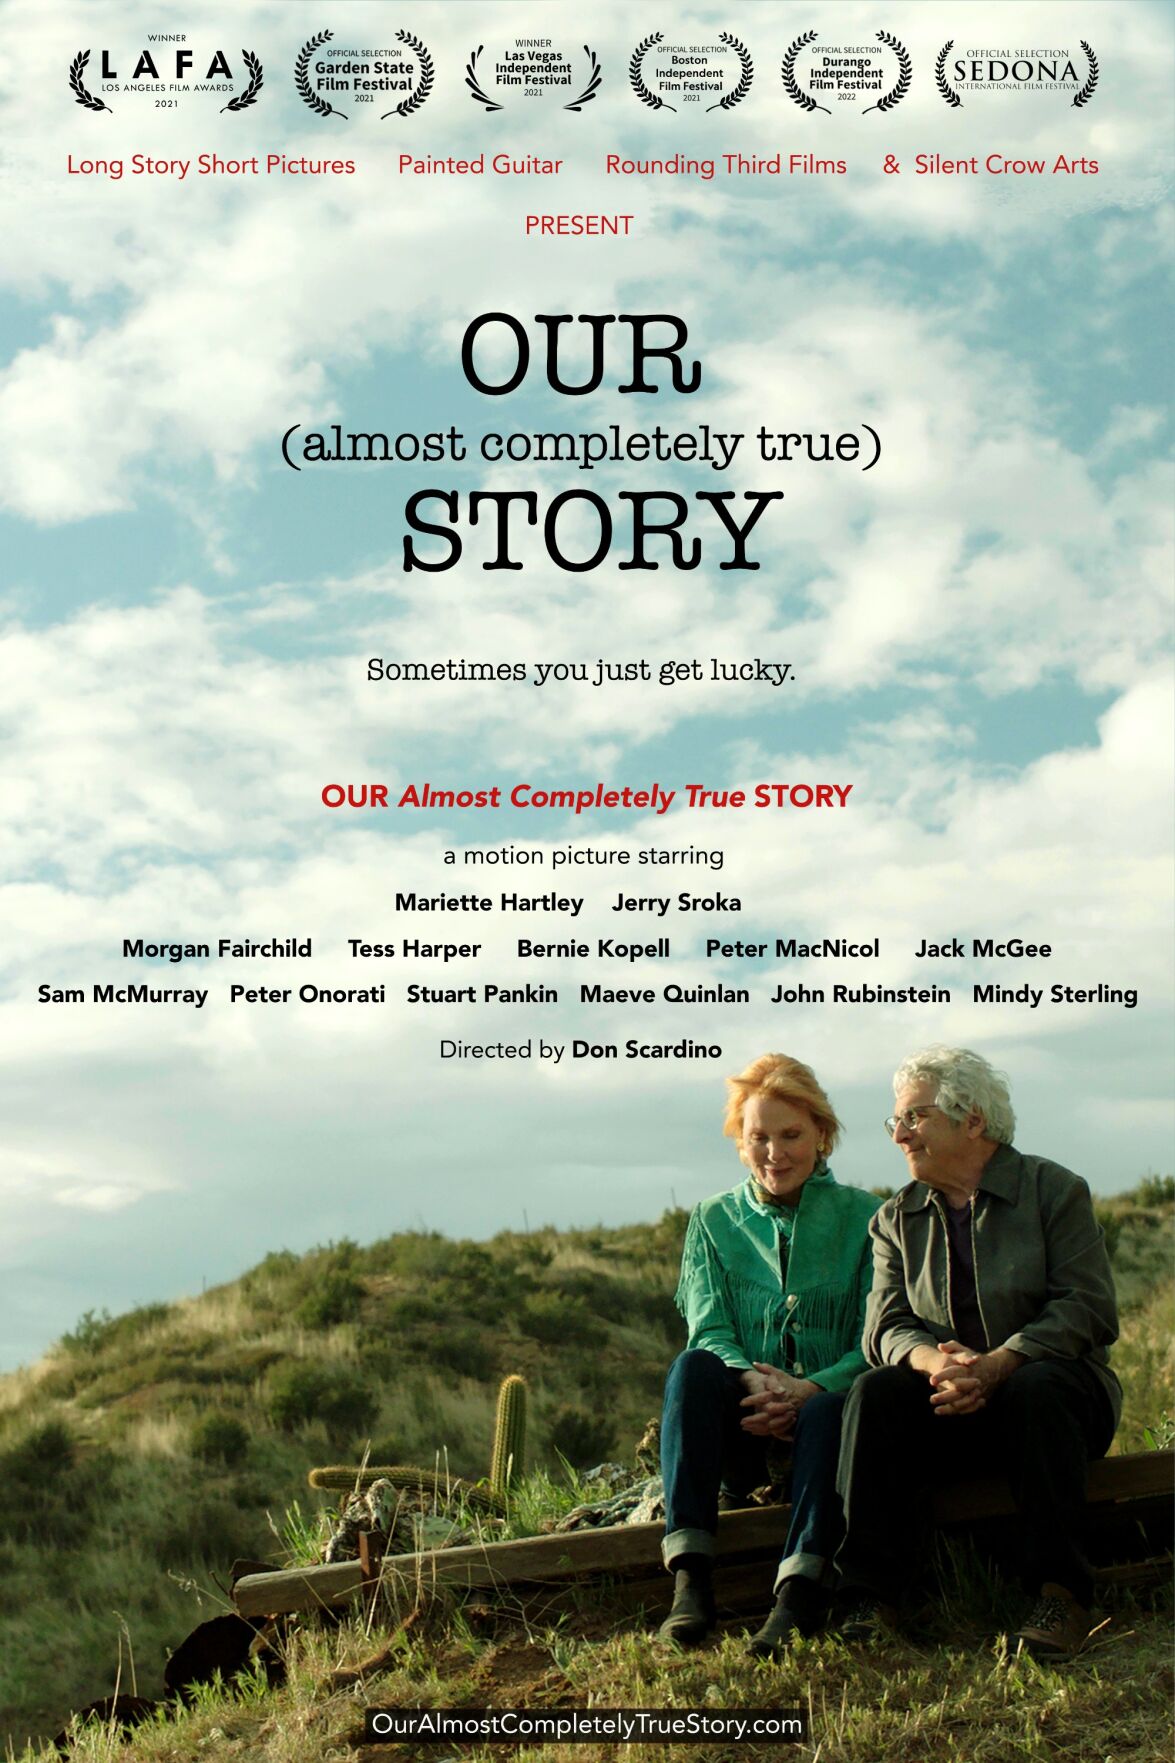 Dec 8, Our (Almost Completely True) Love Story Movie Event With Cast Q&A